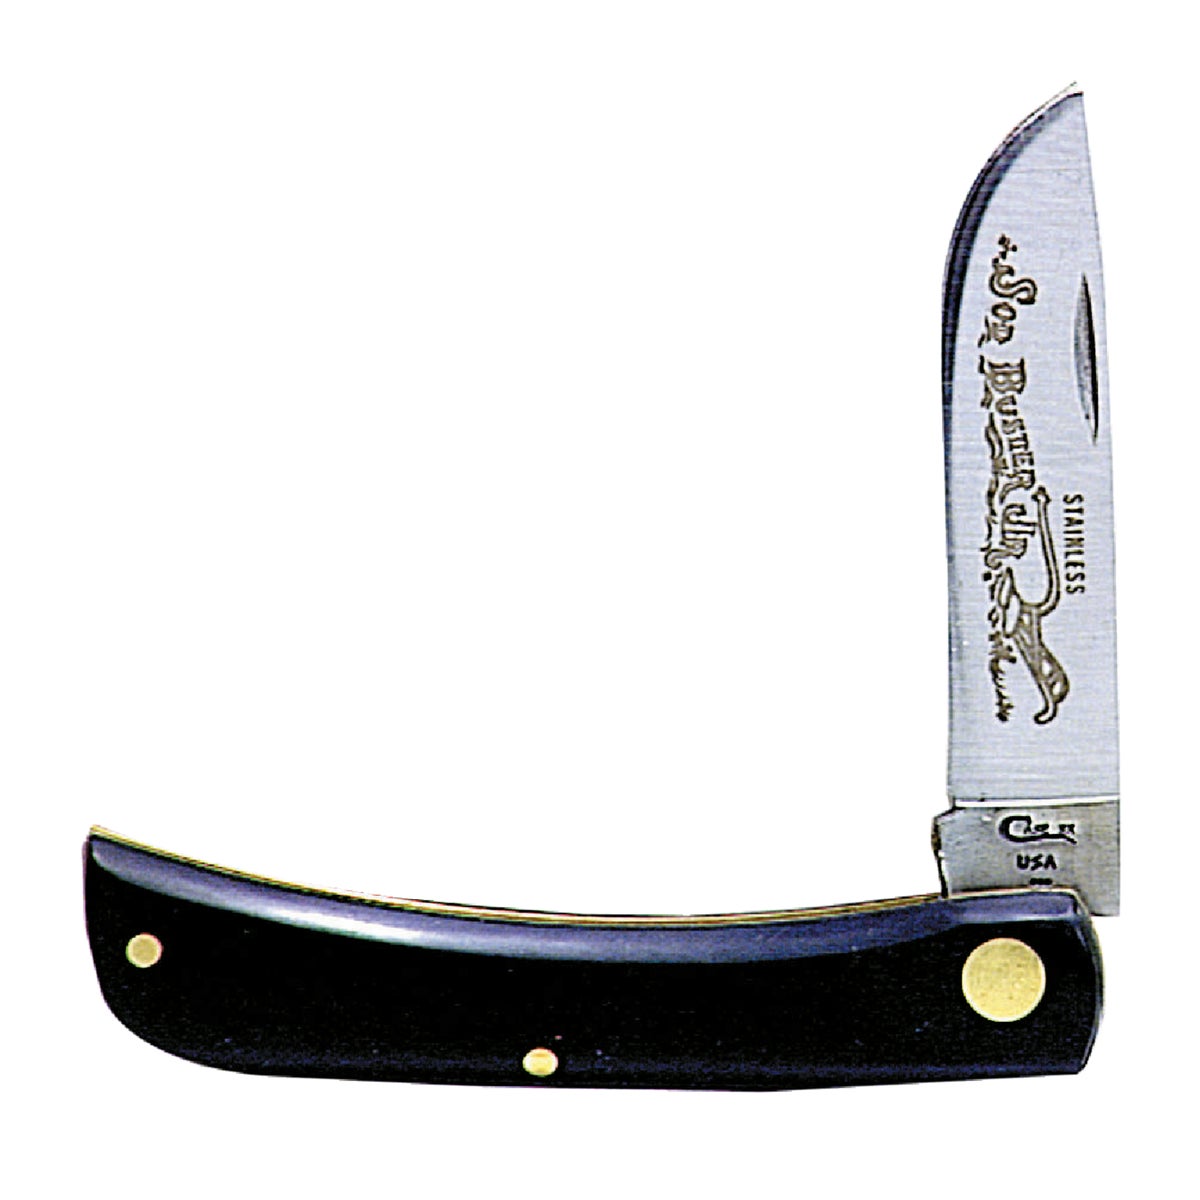 Item 810622, Durable folding knife featuring a jet black synthetic handle.